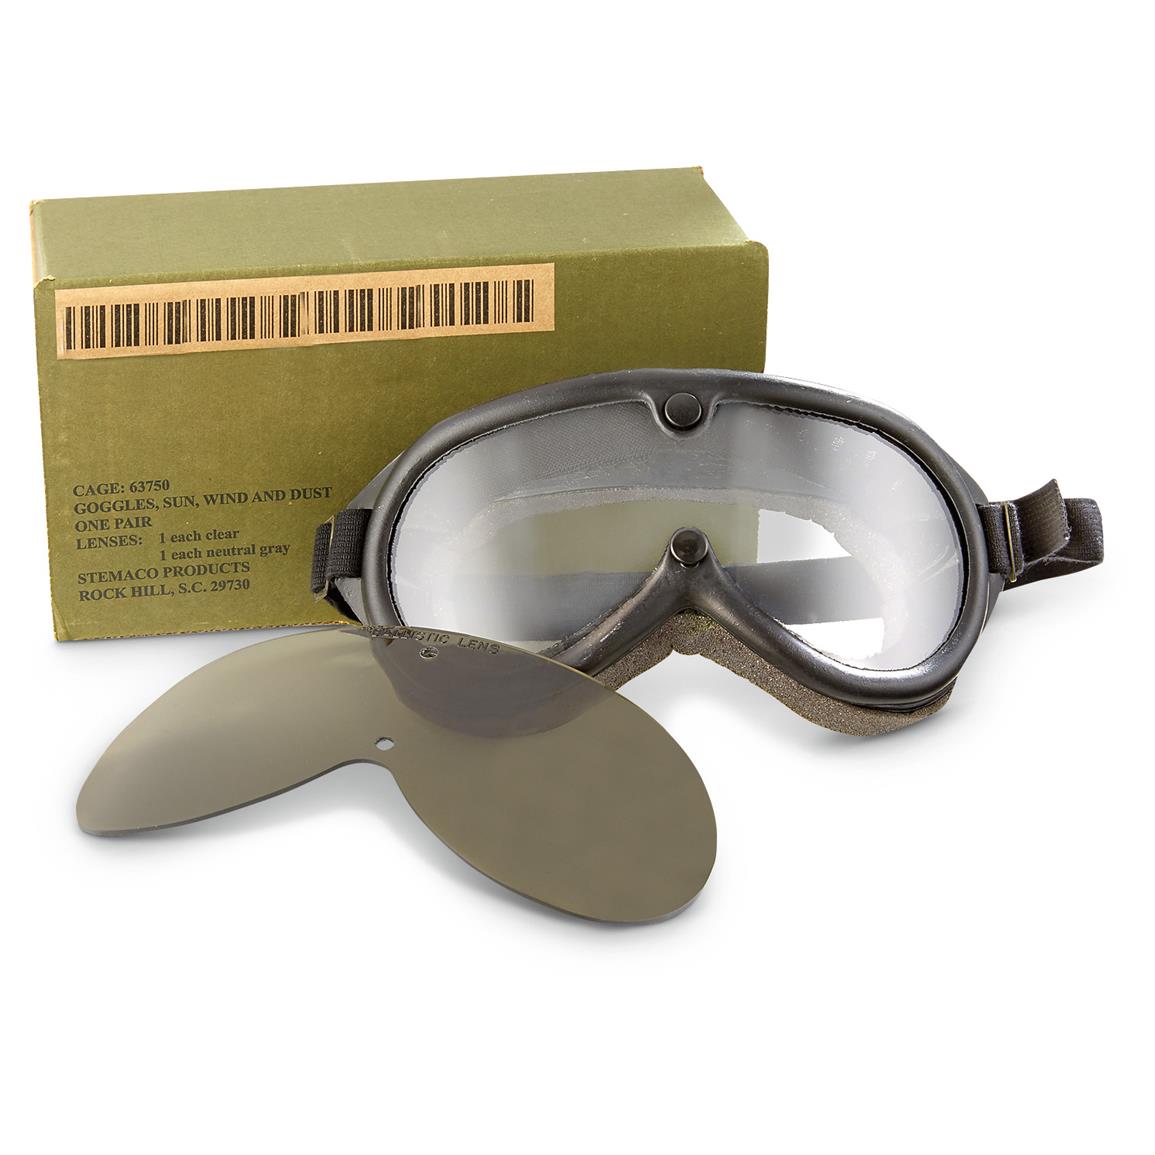 New U S Military Surplus Ballistic Tactical Goggles 215535 Military Eyewear At Sportsman S Guide